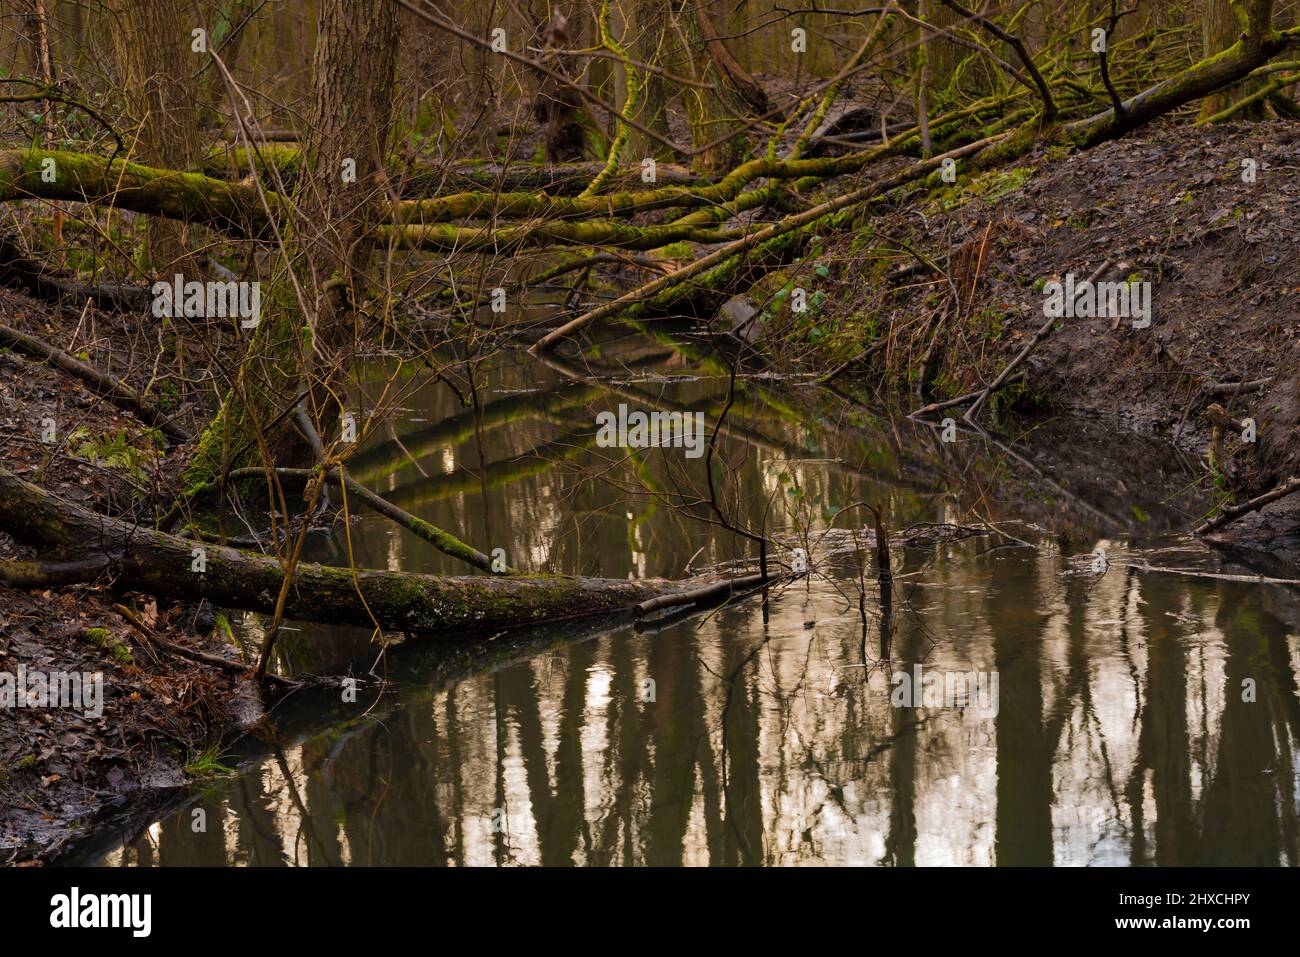 Moss-covered tree trunks lie in and across a small river, untouched nature Stock Photo